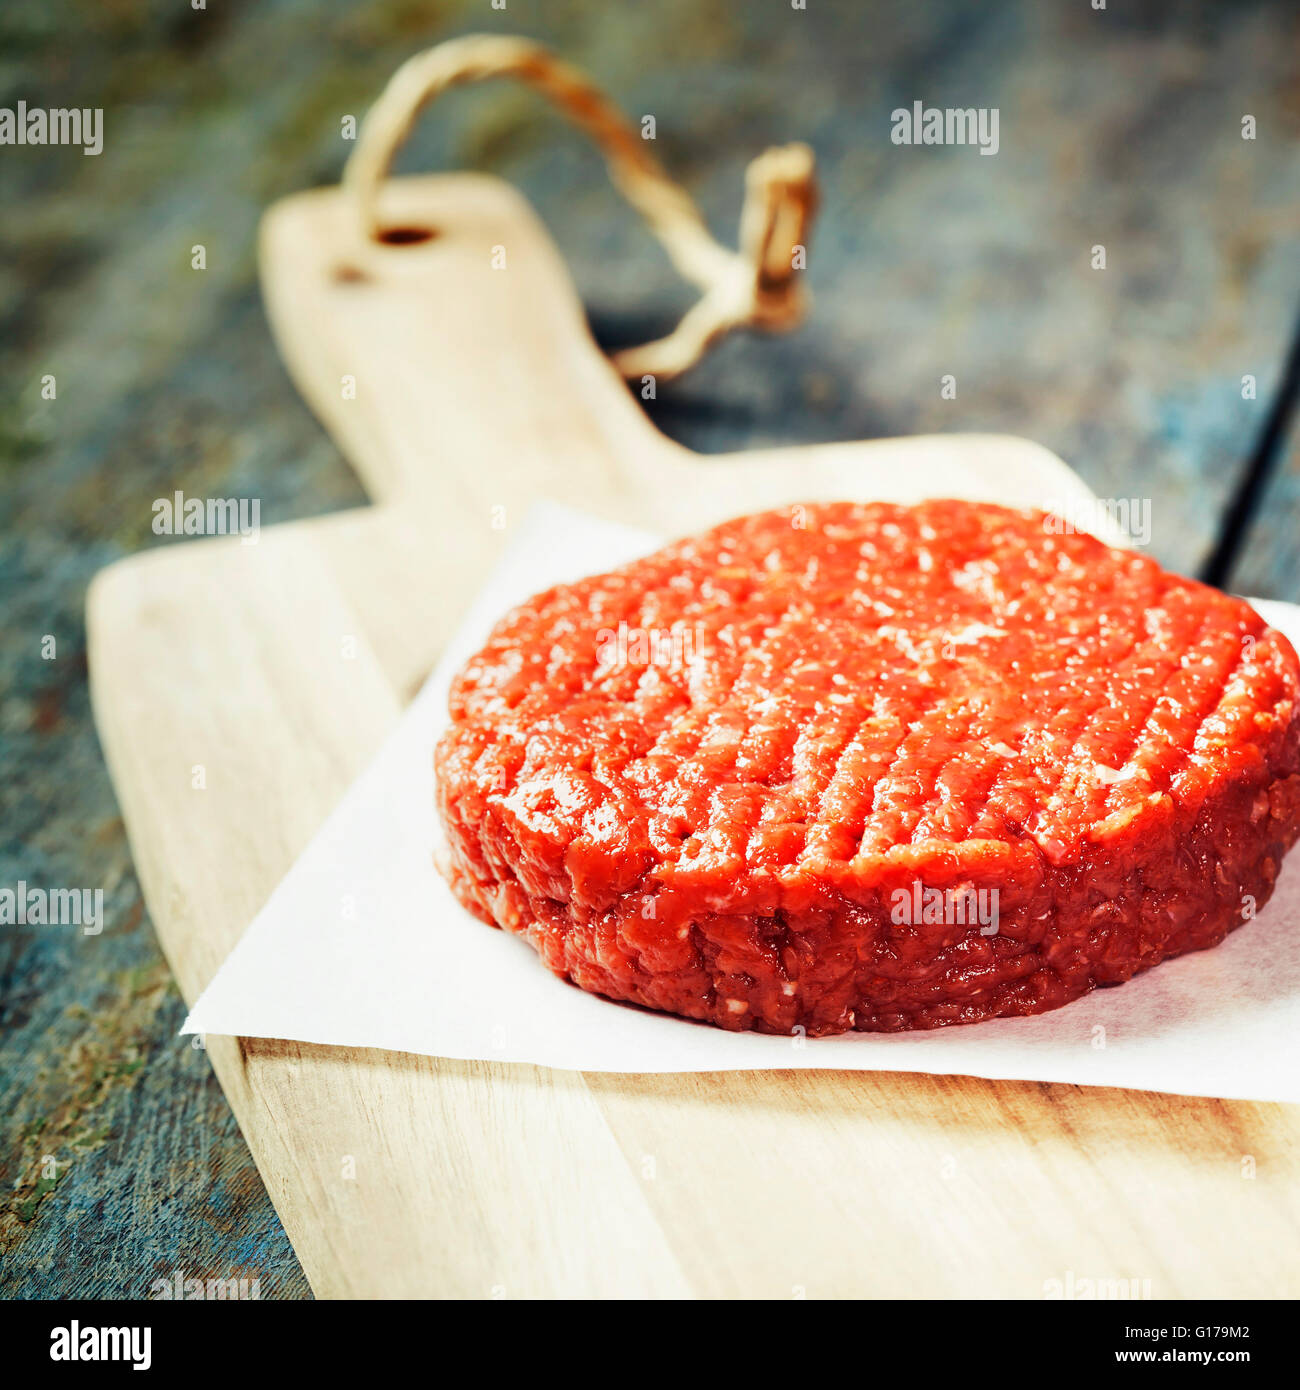 Raw Ground beef meat Burger steak cutlet on vintage wooden boards Stock Photo